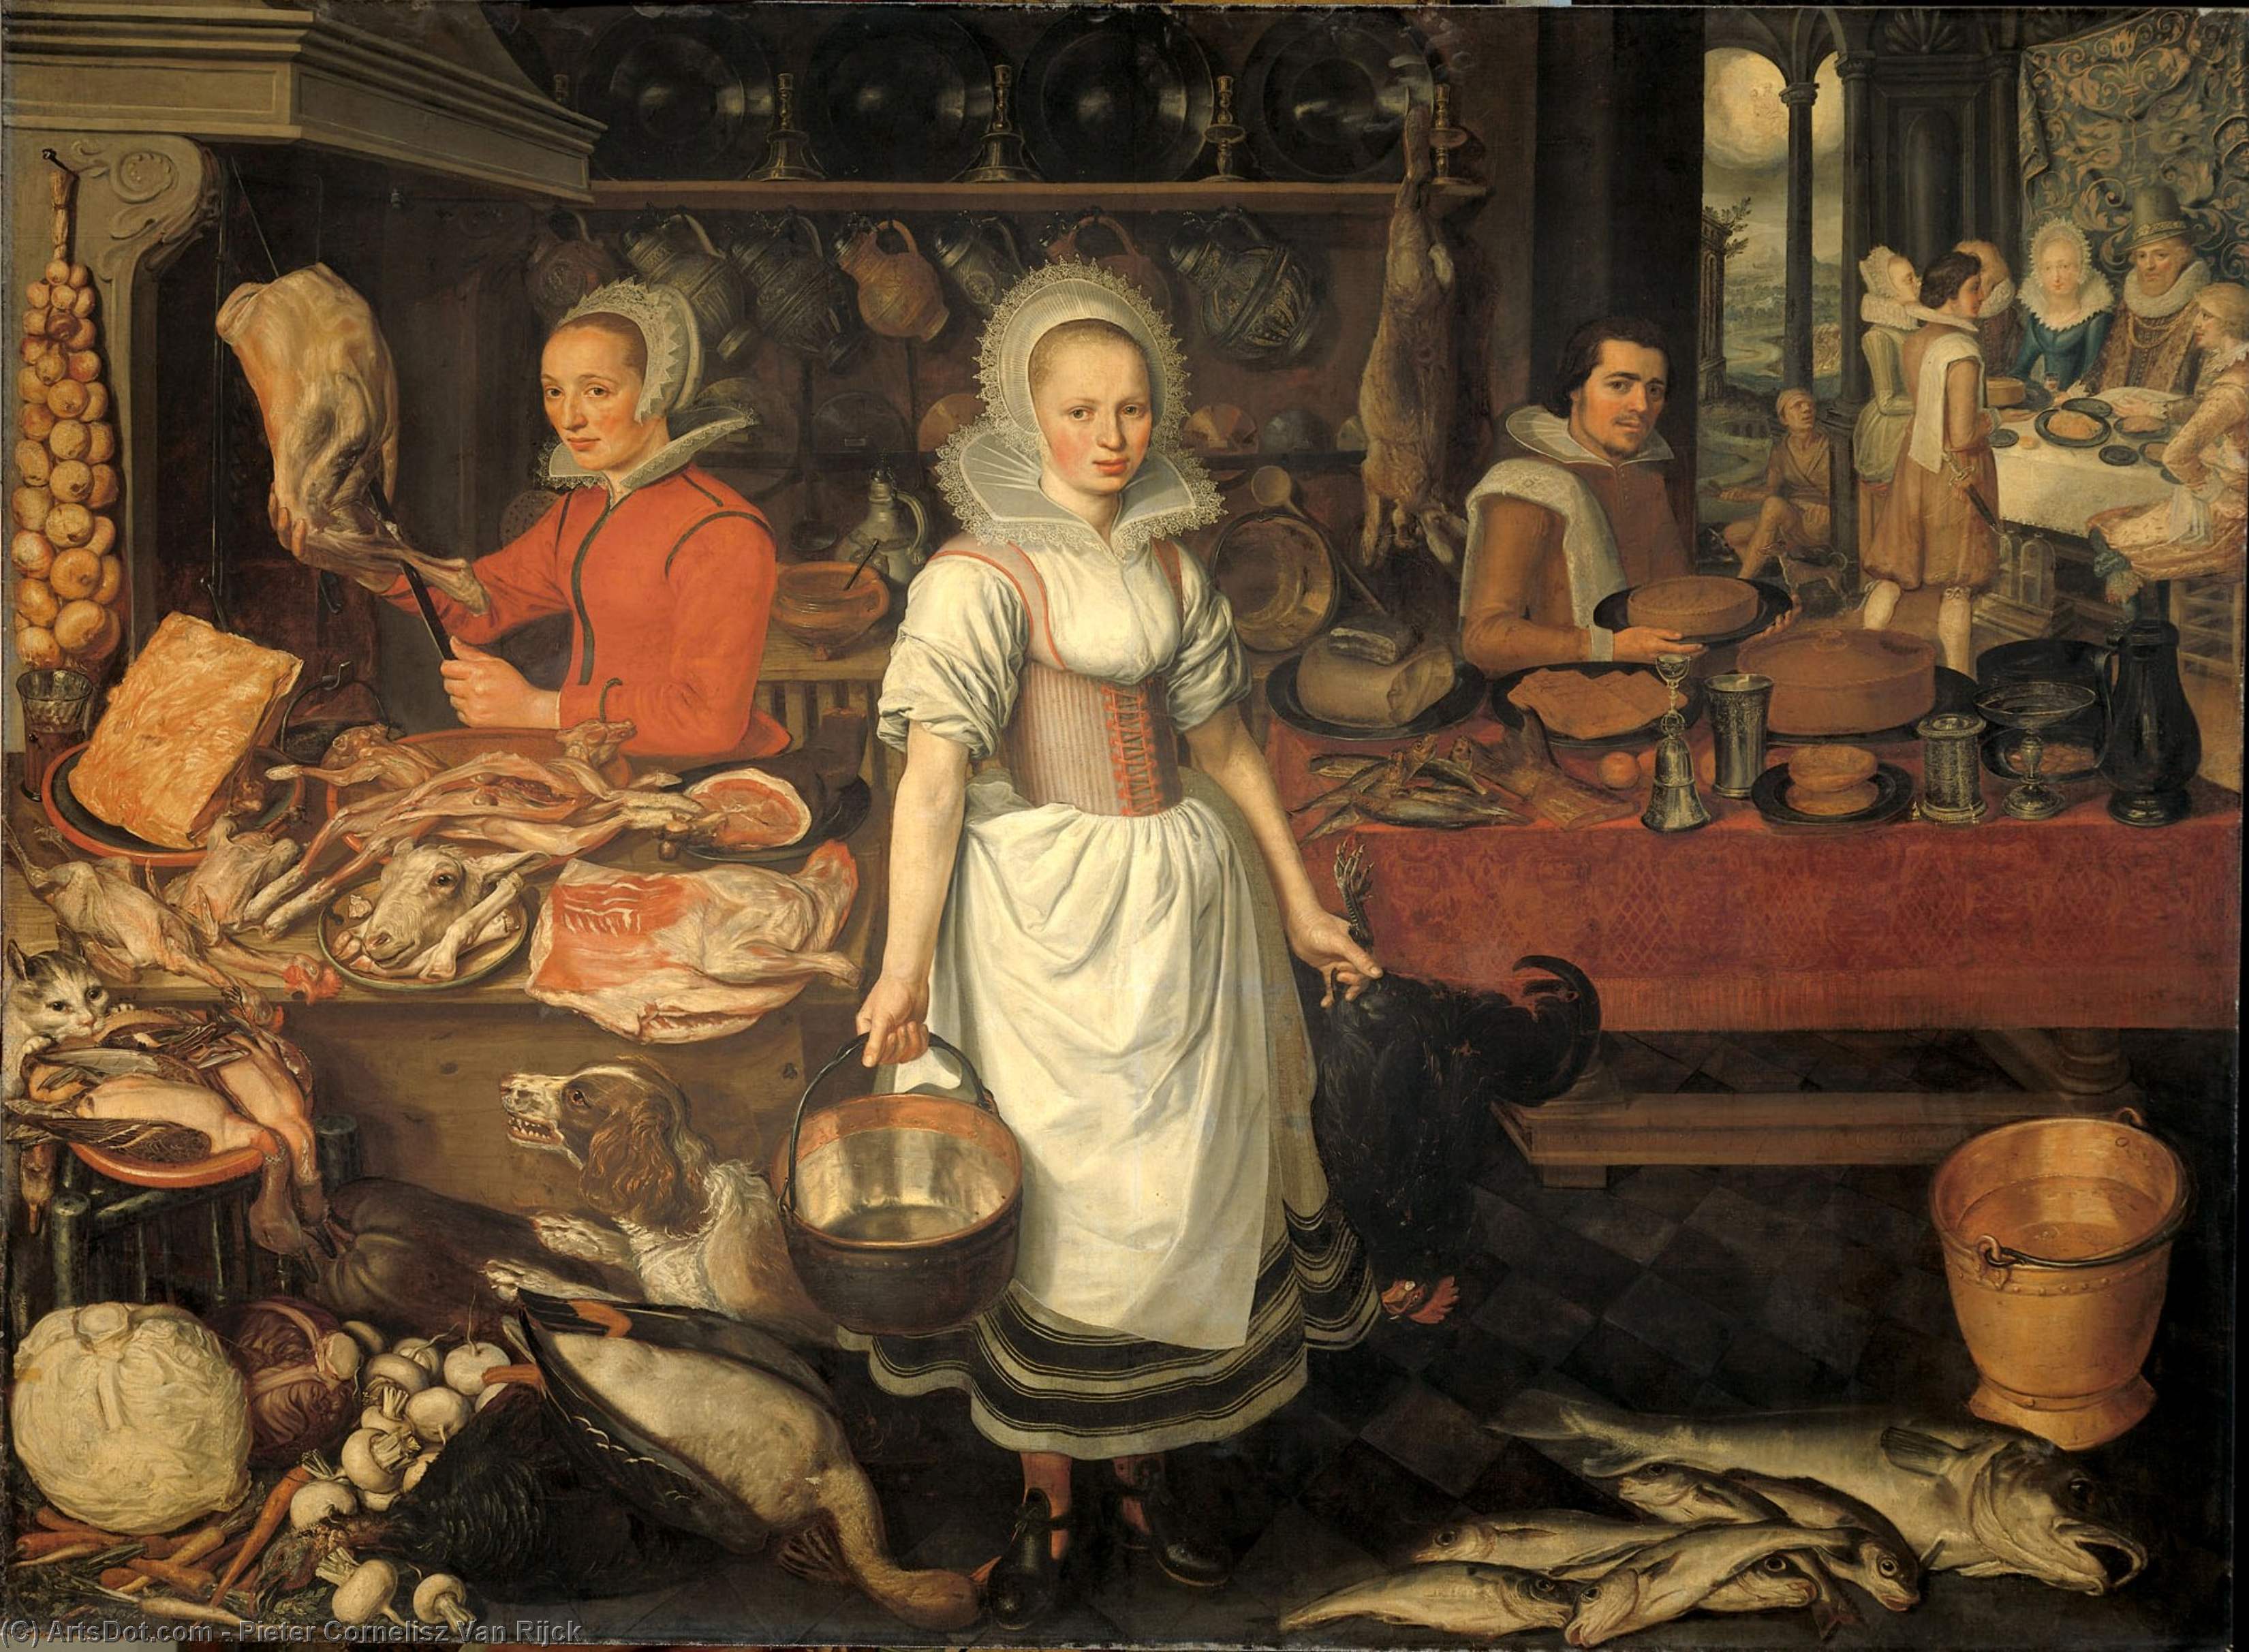 Order Paintings Reproductions Kitchen Interior With The Parable Of The Rich Man And The Poor Lazarus. by Pieter Cornelisz Van Rijck (1567-1637, Netherlands) | ArtsDot.com